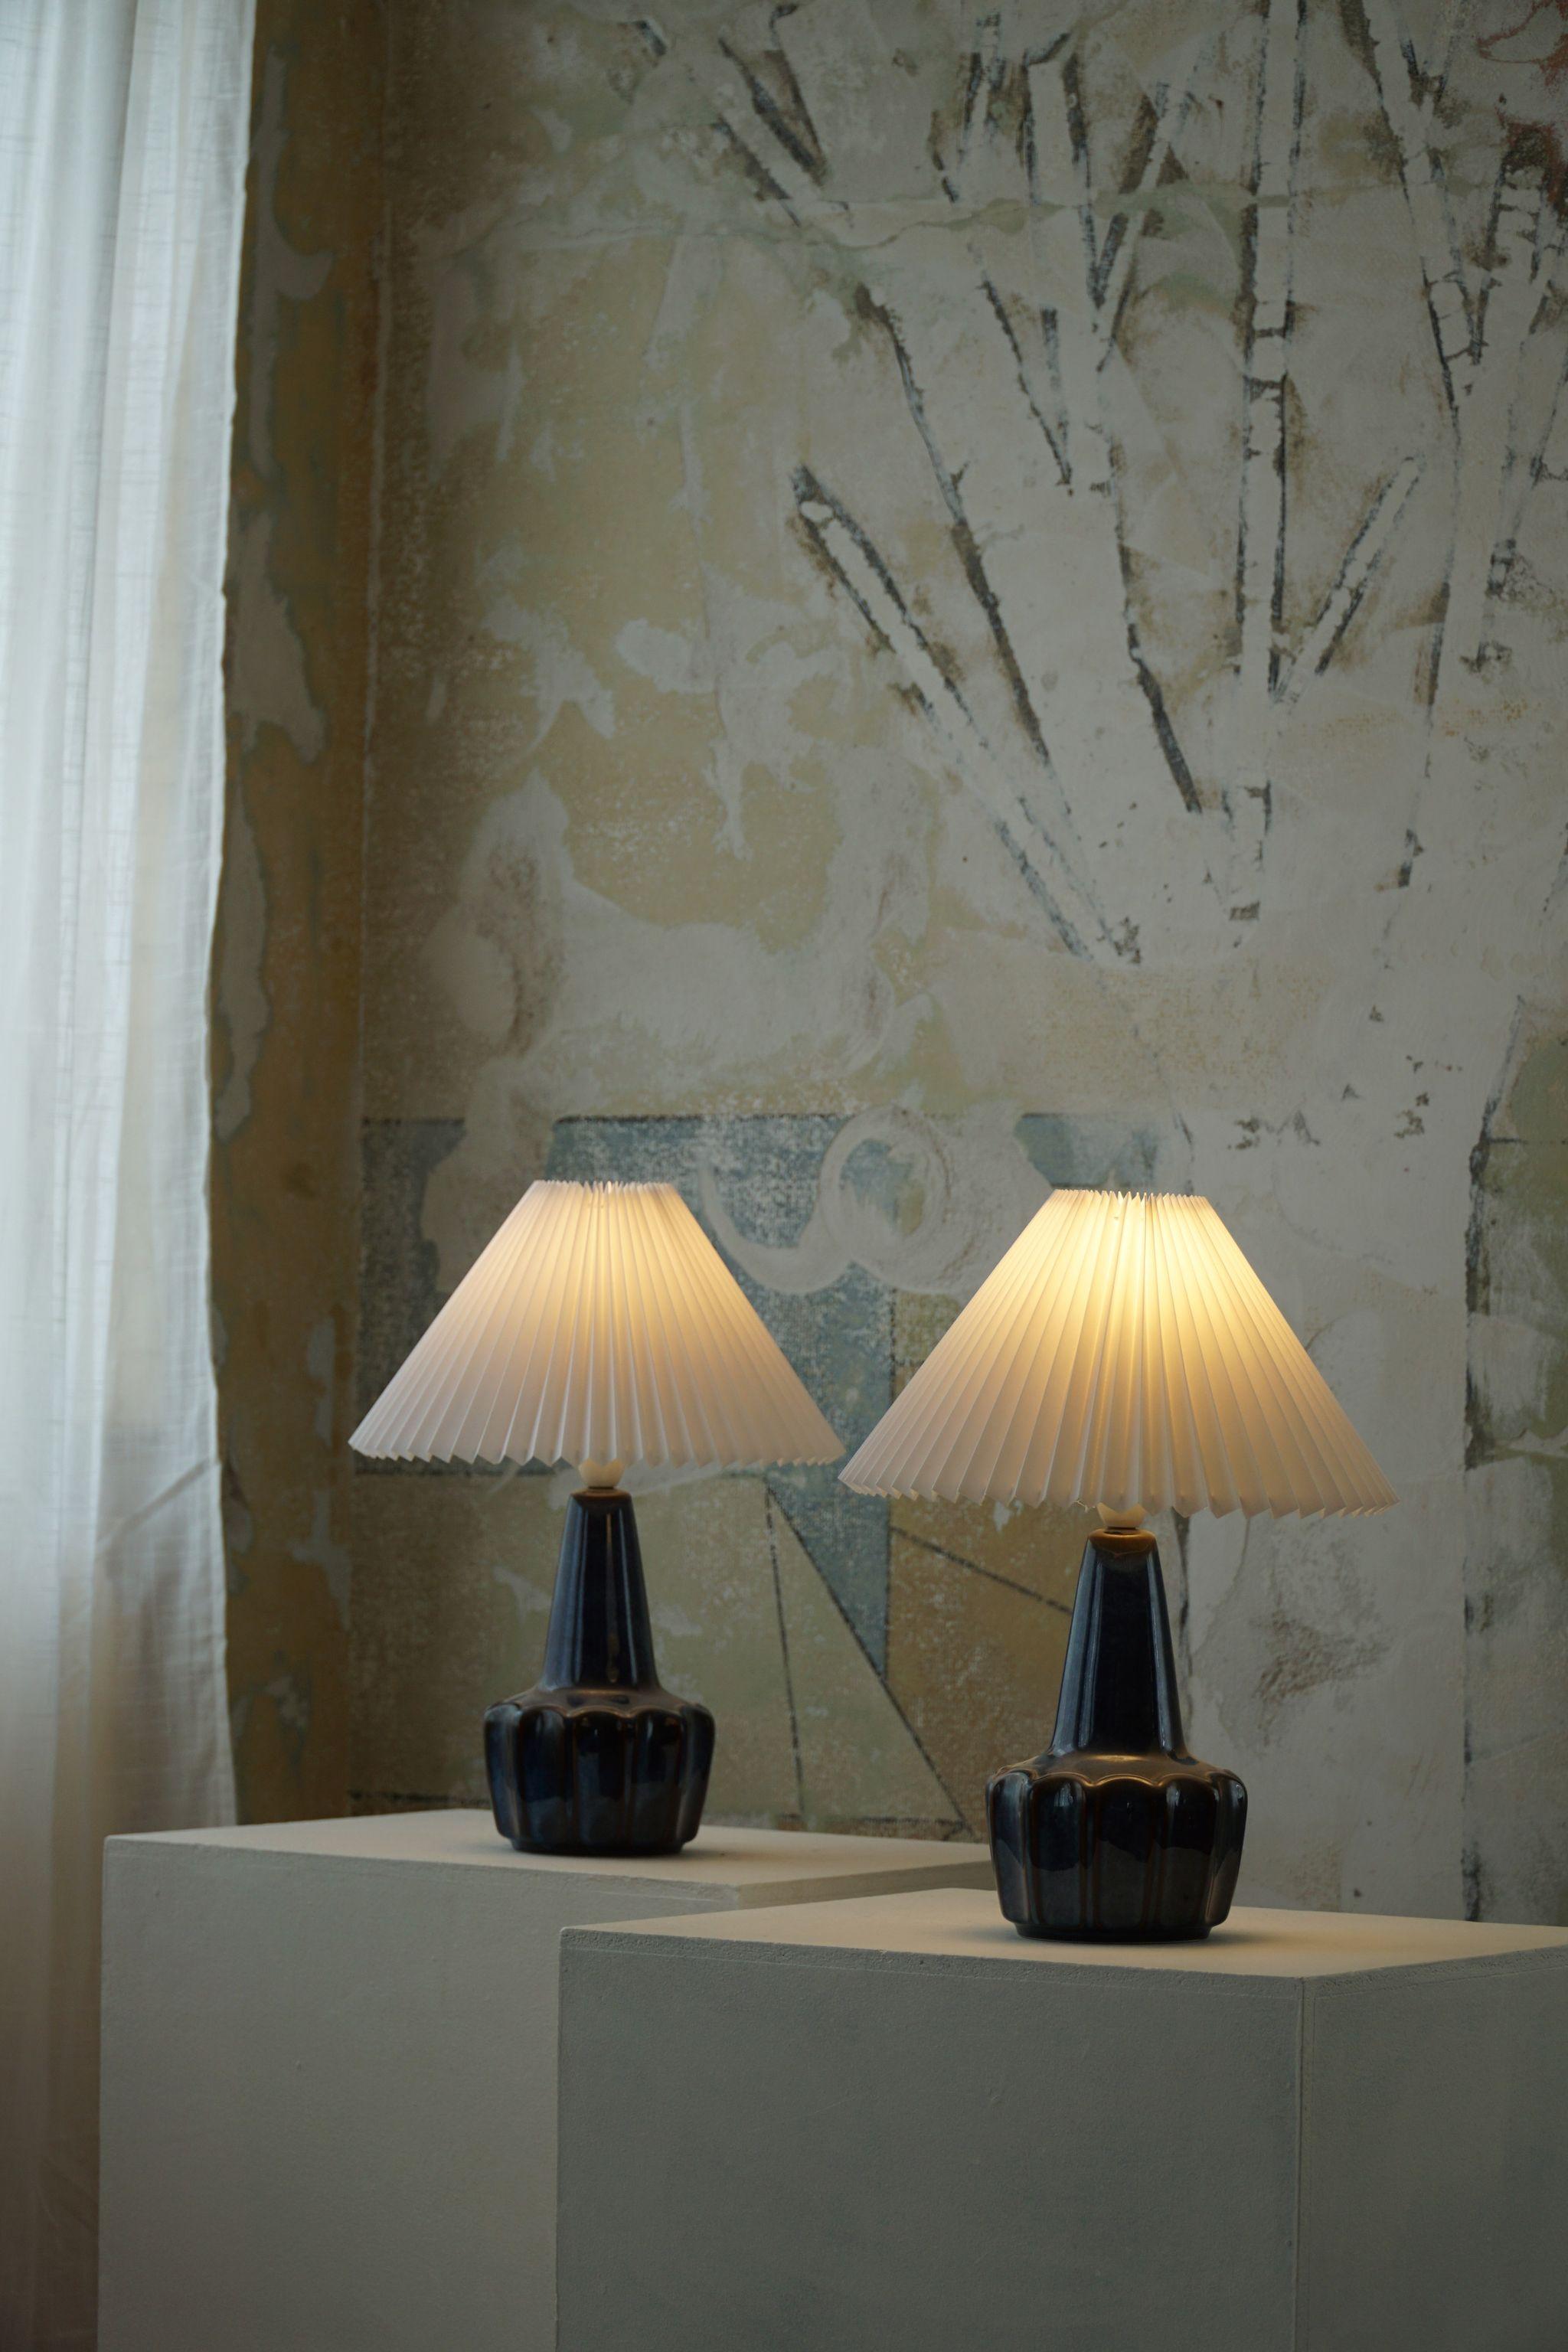 A beautiful pair of ceramic table lamps with a luxurious clam glaze. Produced at Søholm Ceramic fabric in 1960s. Denmark. Marked underneath.

Both table lamps are in a mint condition, newly rewired. 

